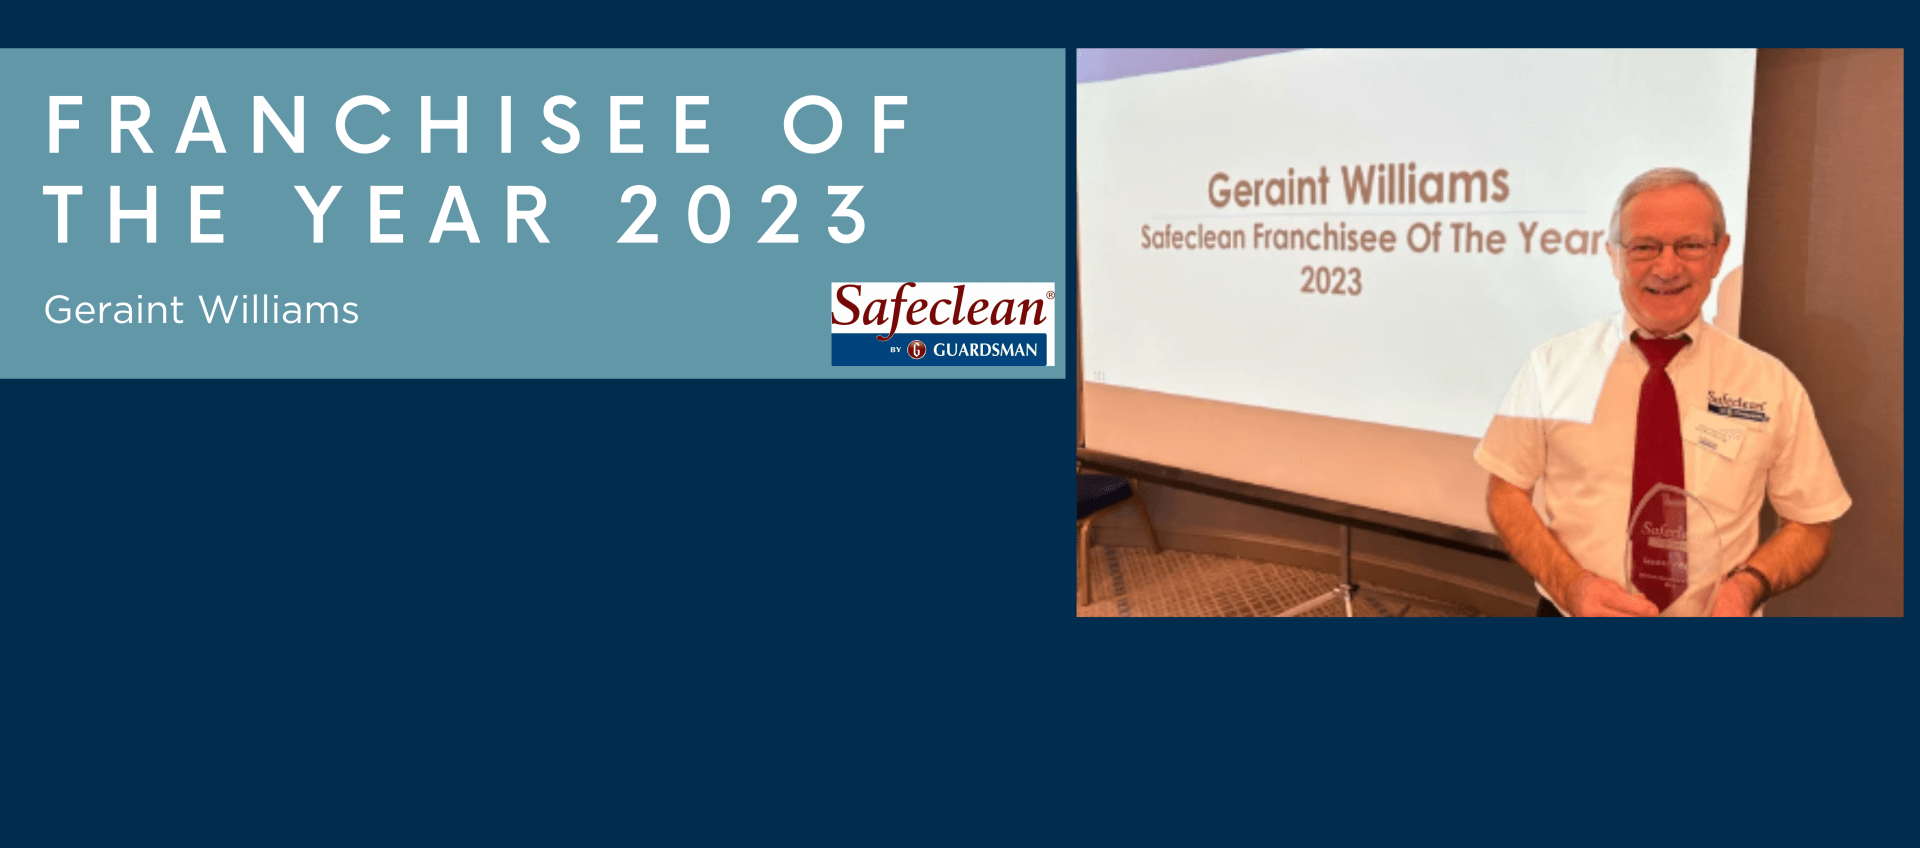 Safeclean franchisee of the year 2023